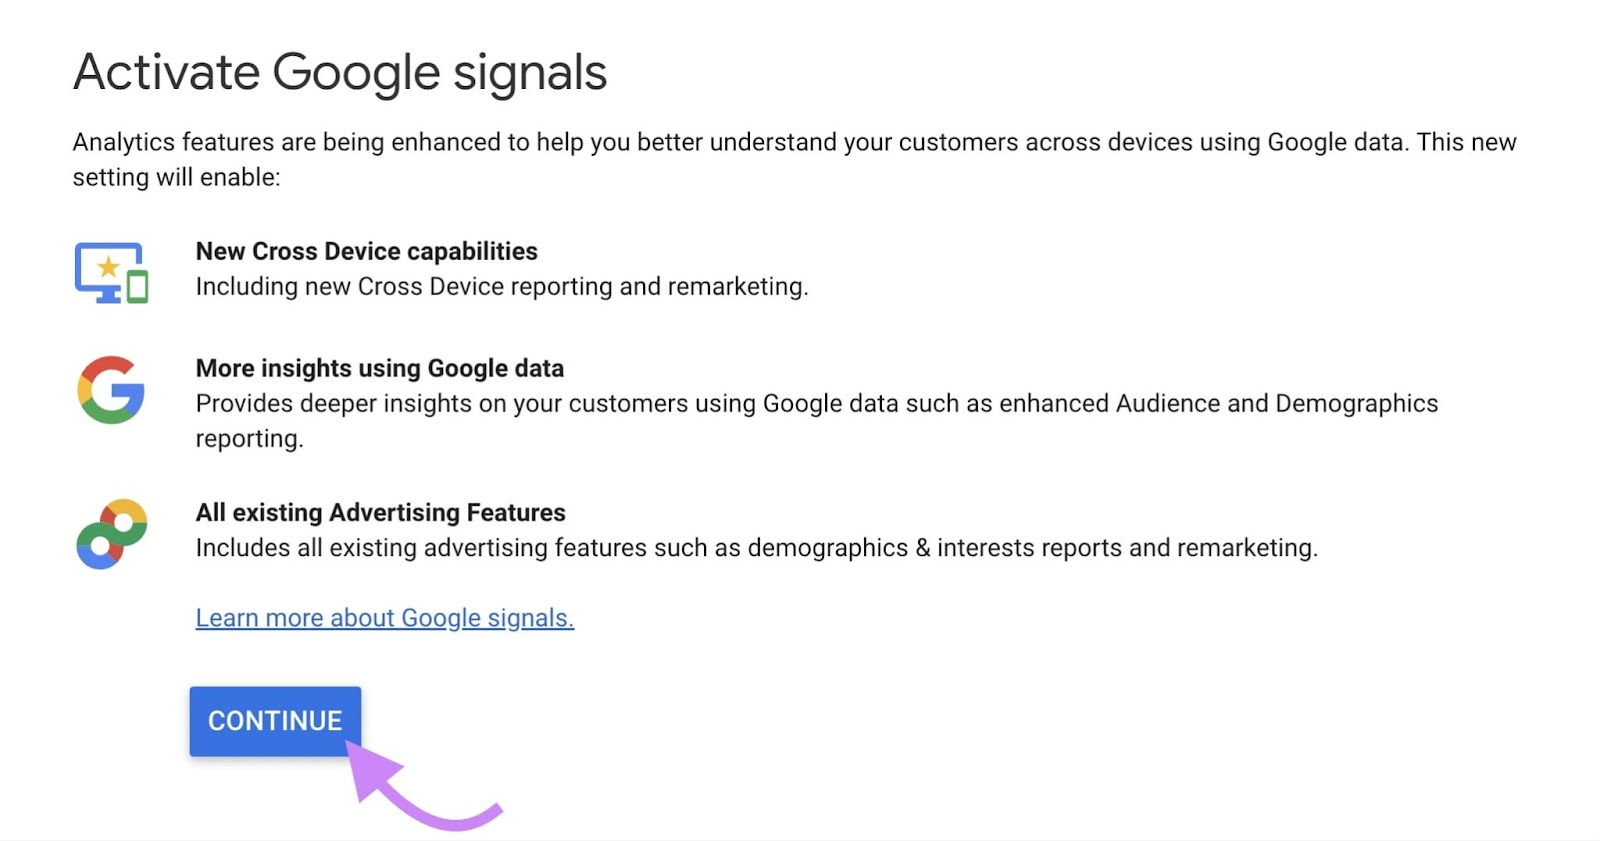 "Continue" button selected in the "Activate Google signals" screen